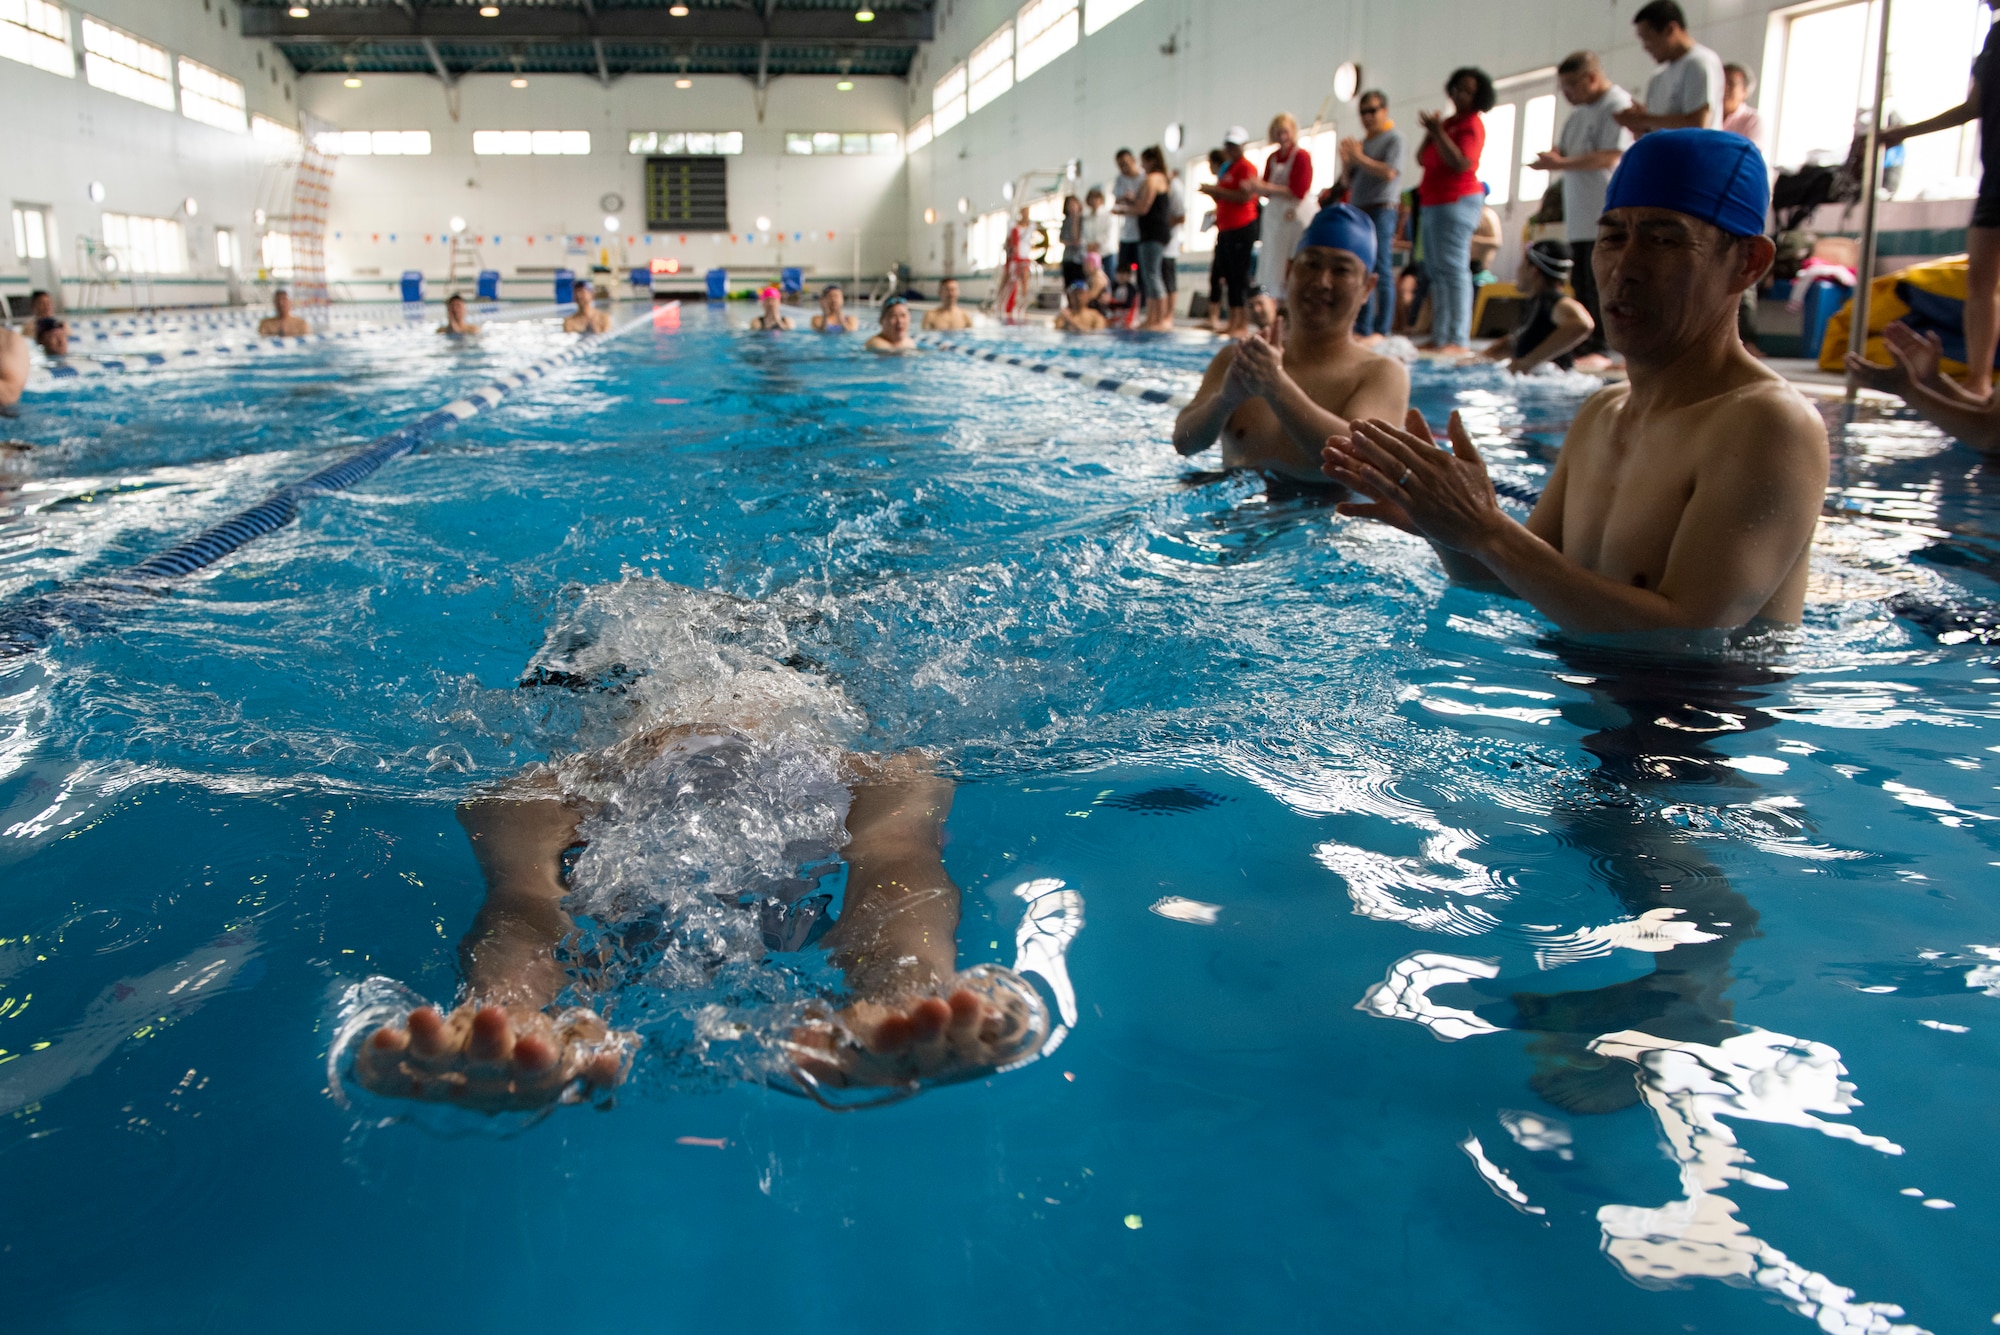 An athlete stretches out to grab the wall while competing in the 15 meter breaststroke race during the Kanto Plains Special Olympics at Yokota Air Base, Japan, May 19, 2018.